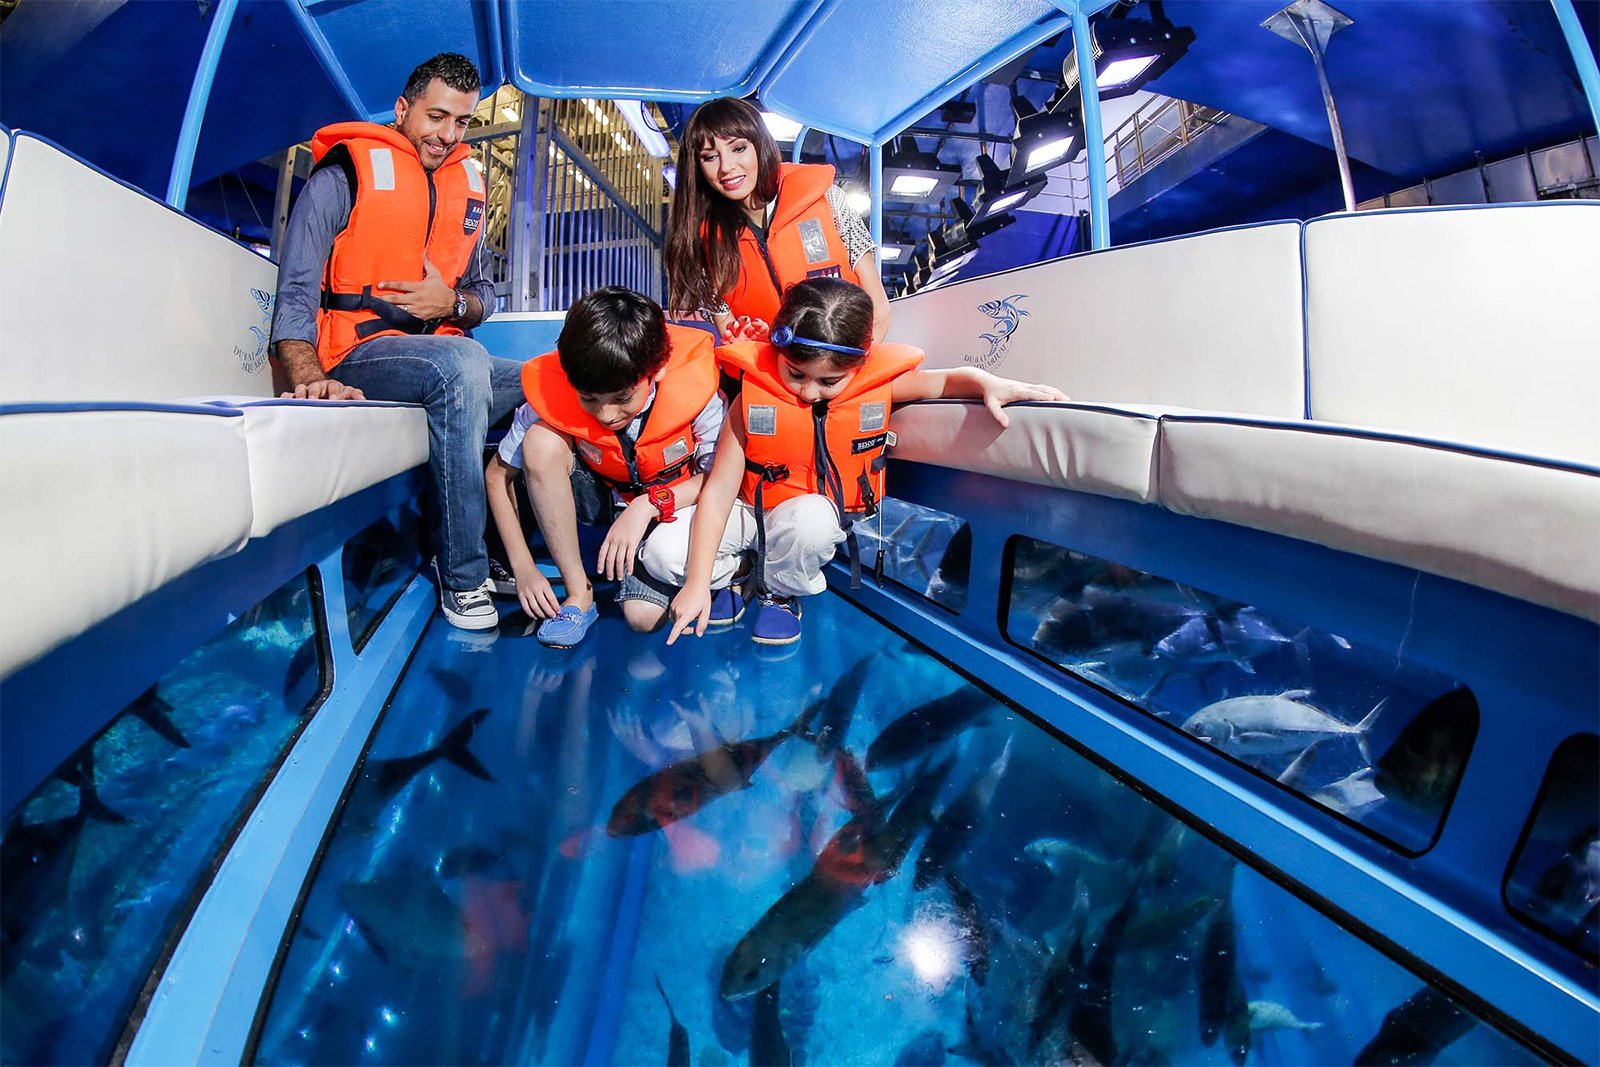 How to take a trip in a glass-bottom boat in Dubai